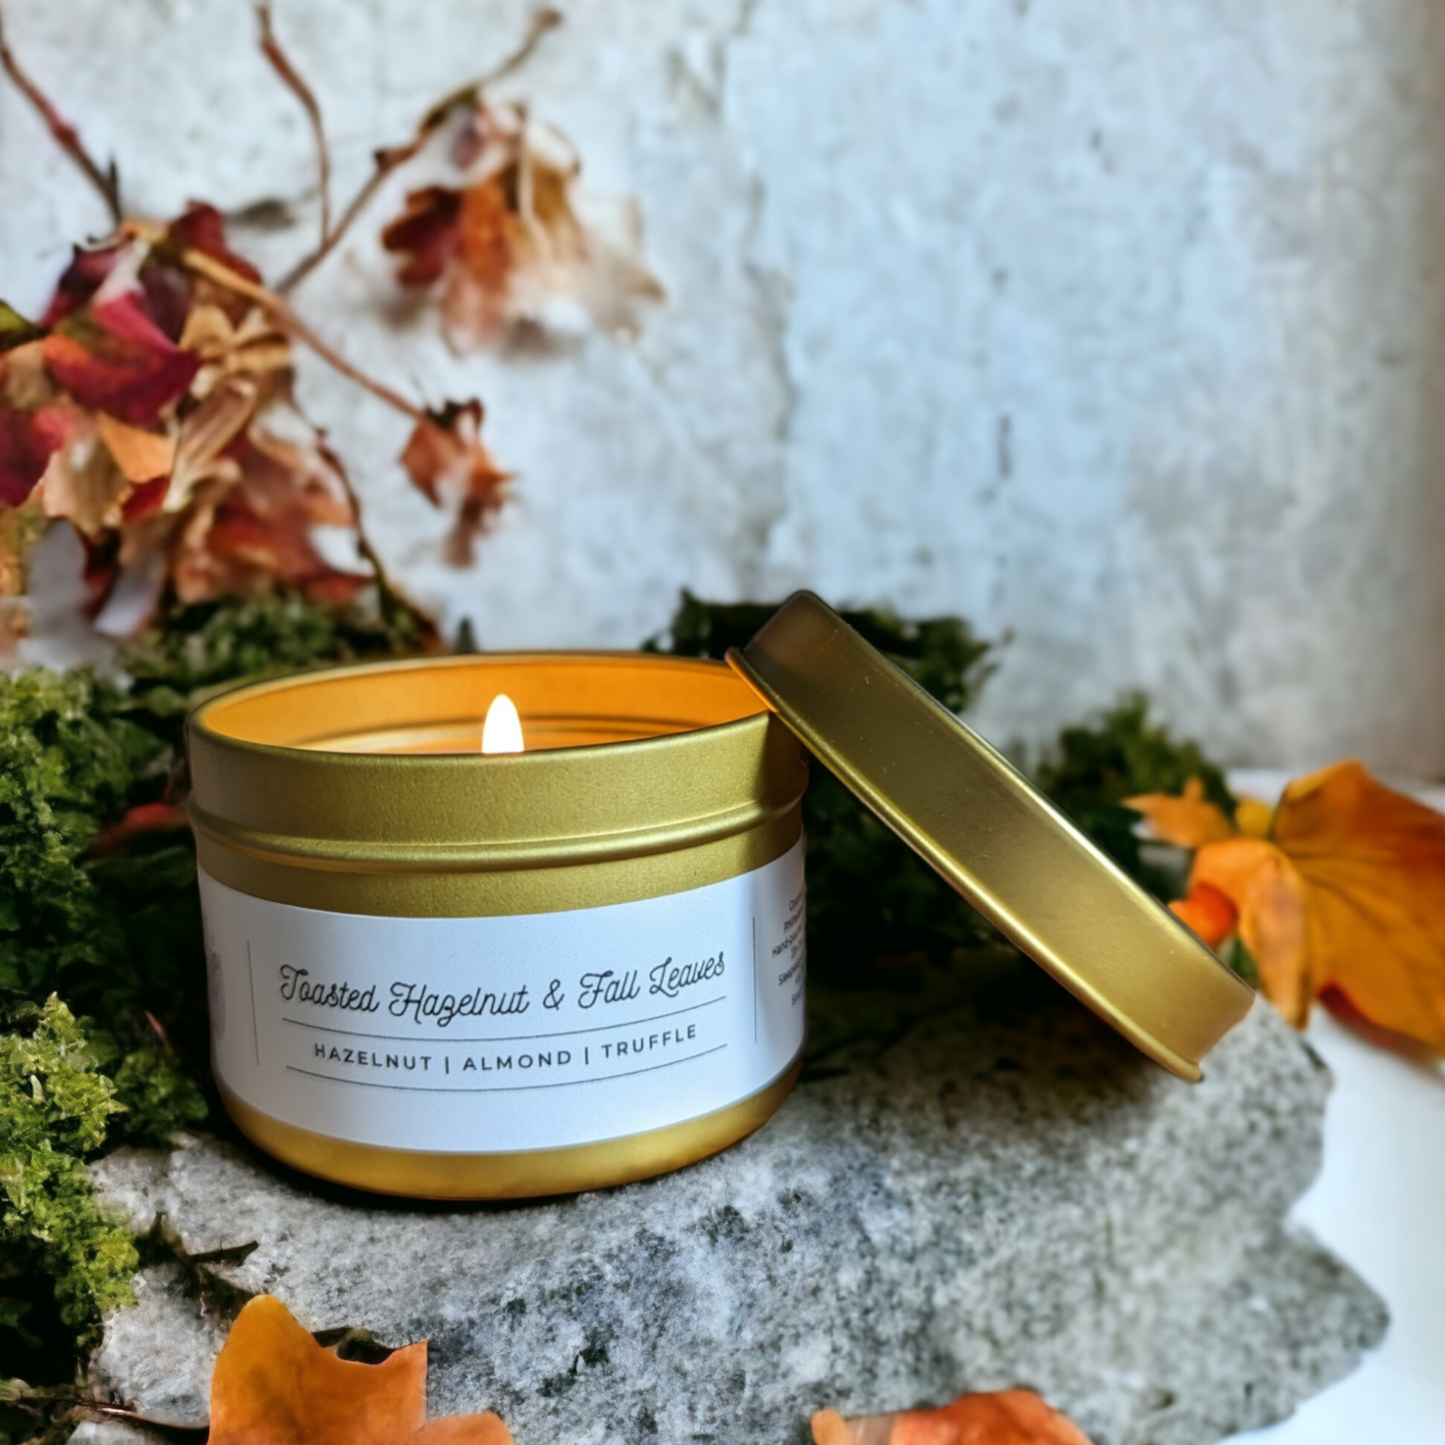 Toasted Hazelnut & Fall Leaves Candle in a gold tin, is displayed on a piece of stone. With orange & red fall leaves and green moss in background.